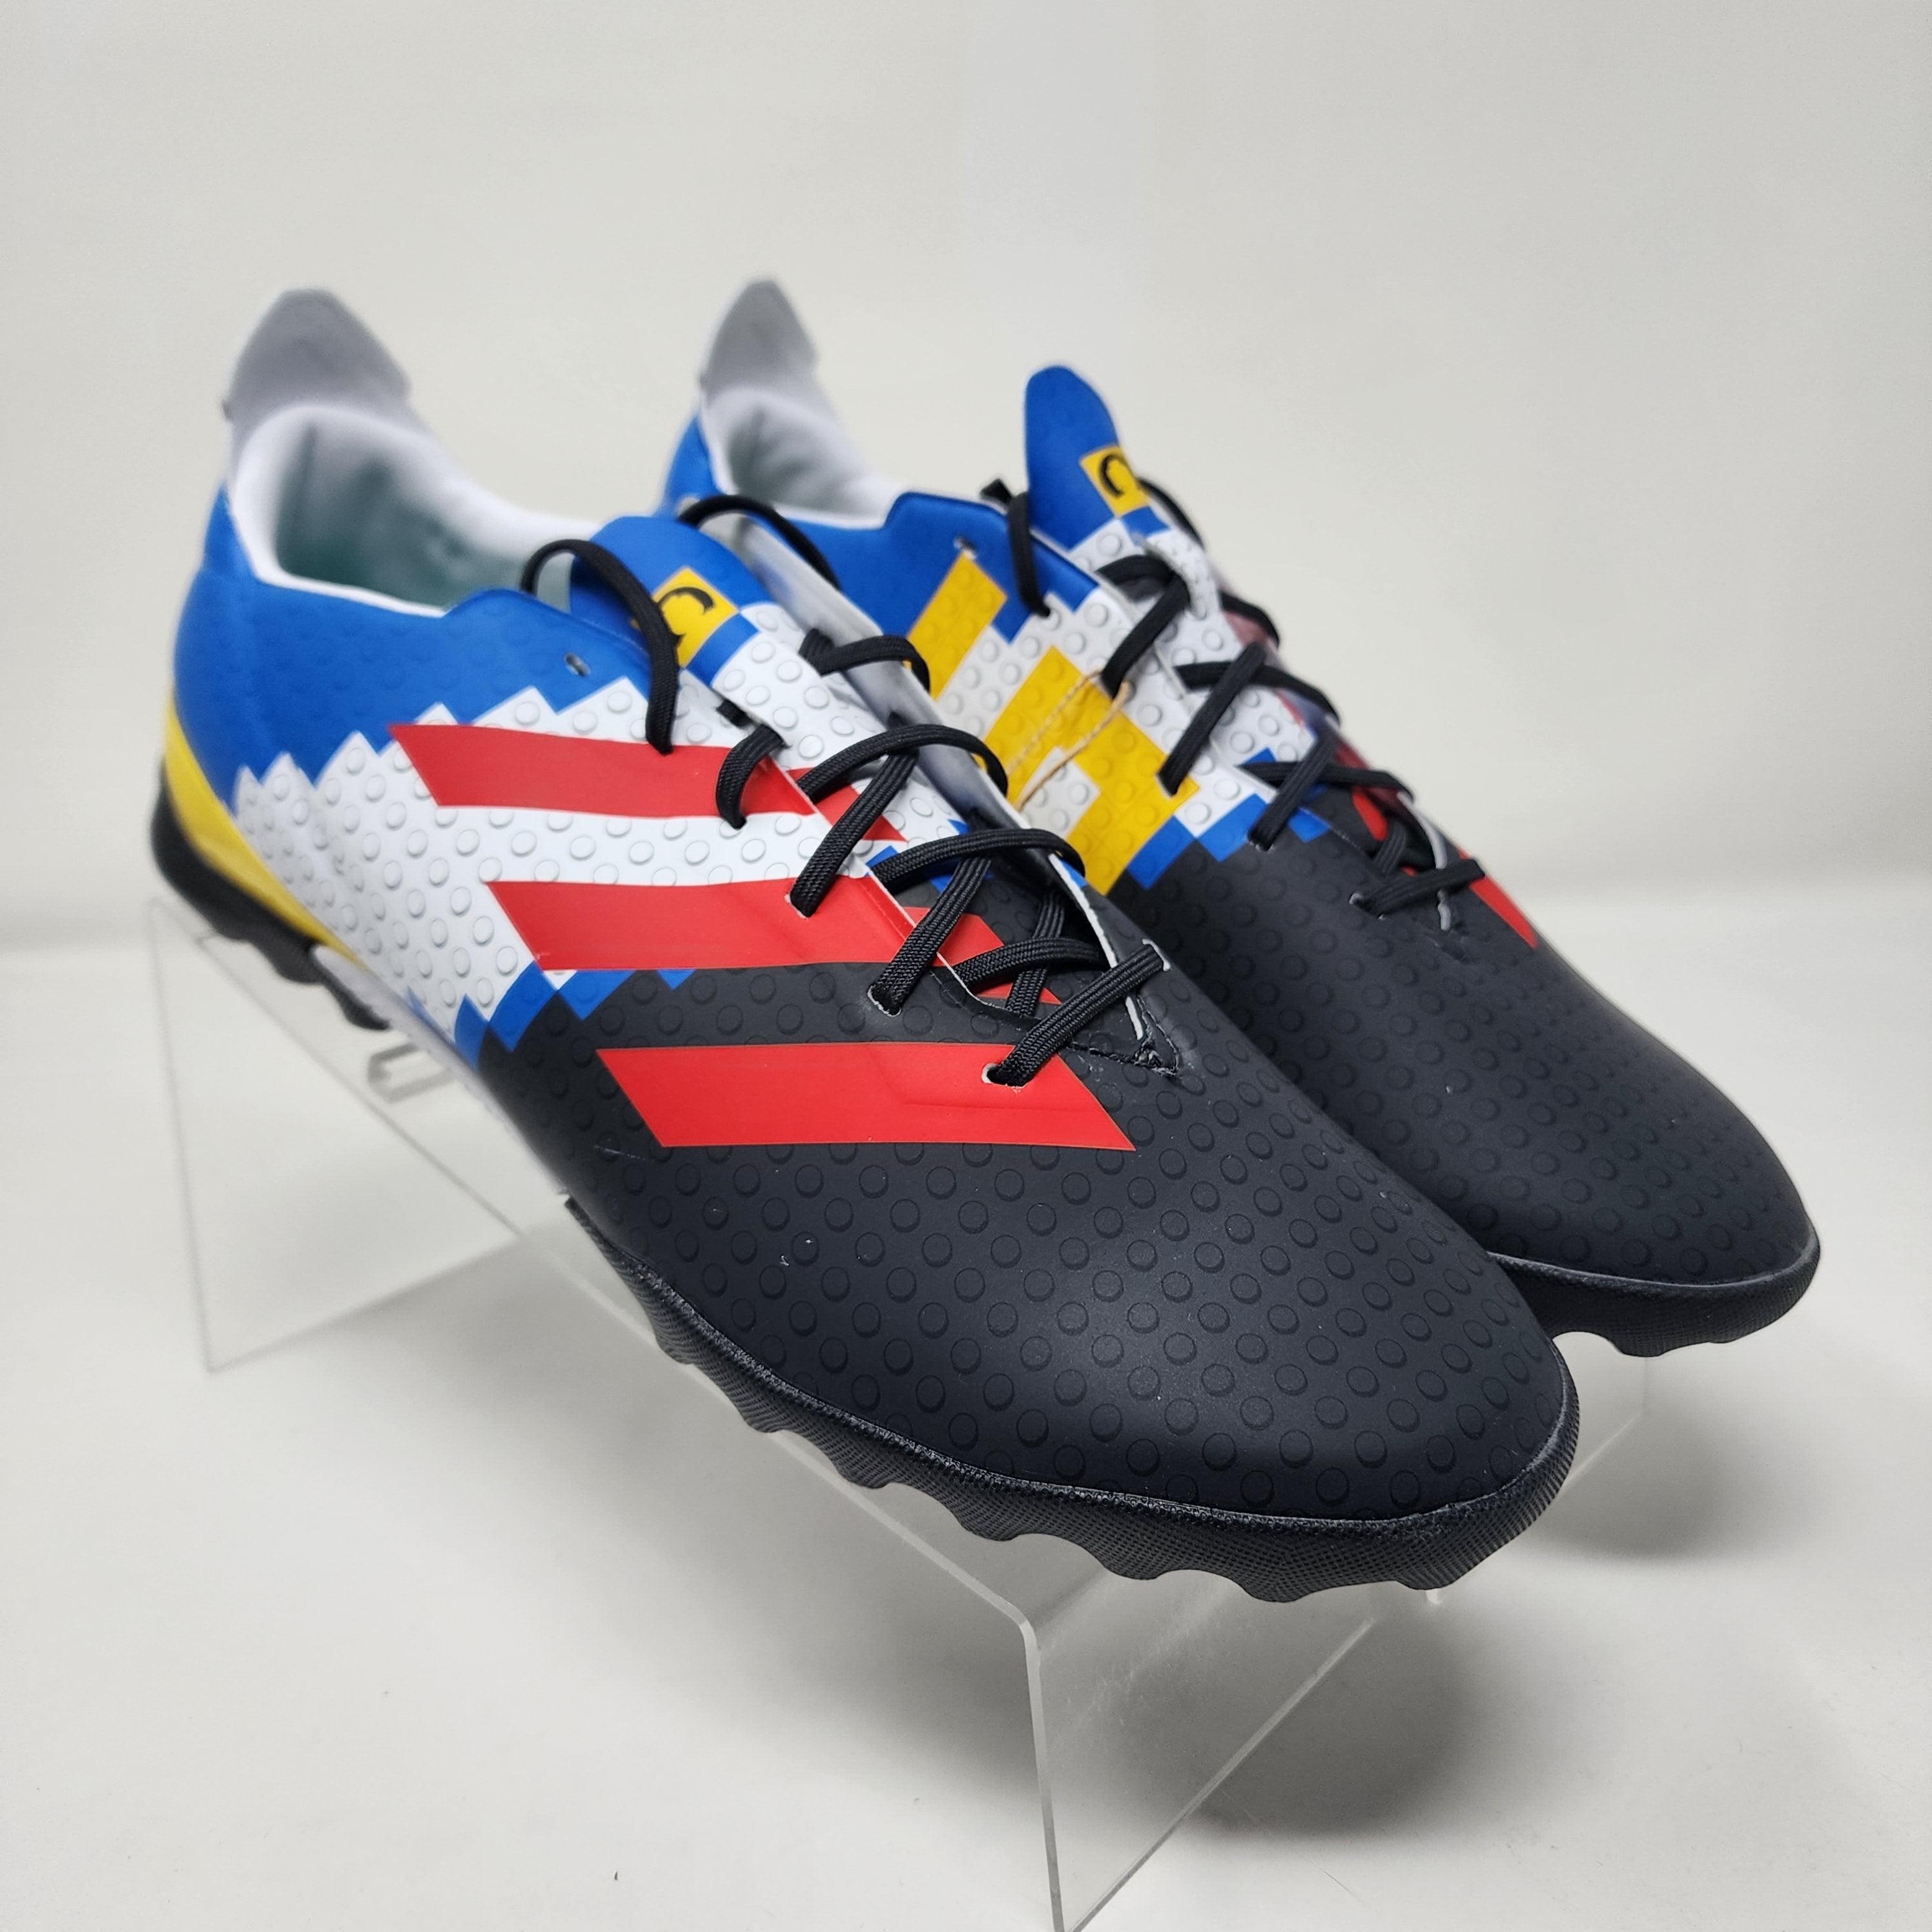 Adidas LEGO Gamemode FG Soccer Cleats Men’s Size 6 Women’s 7 Shoes NEW